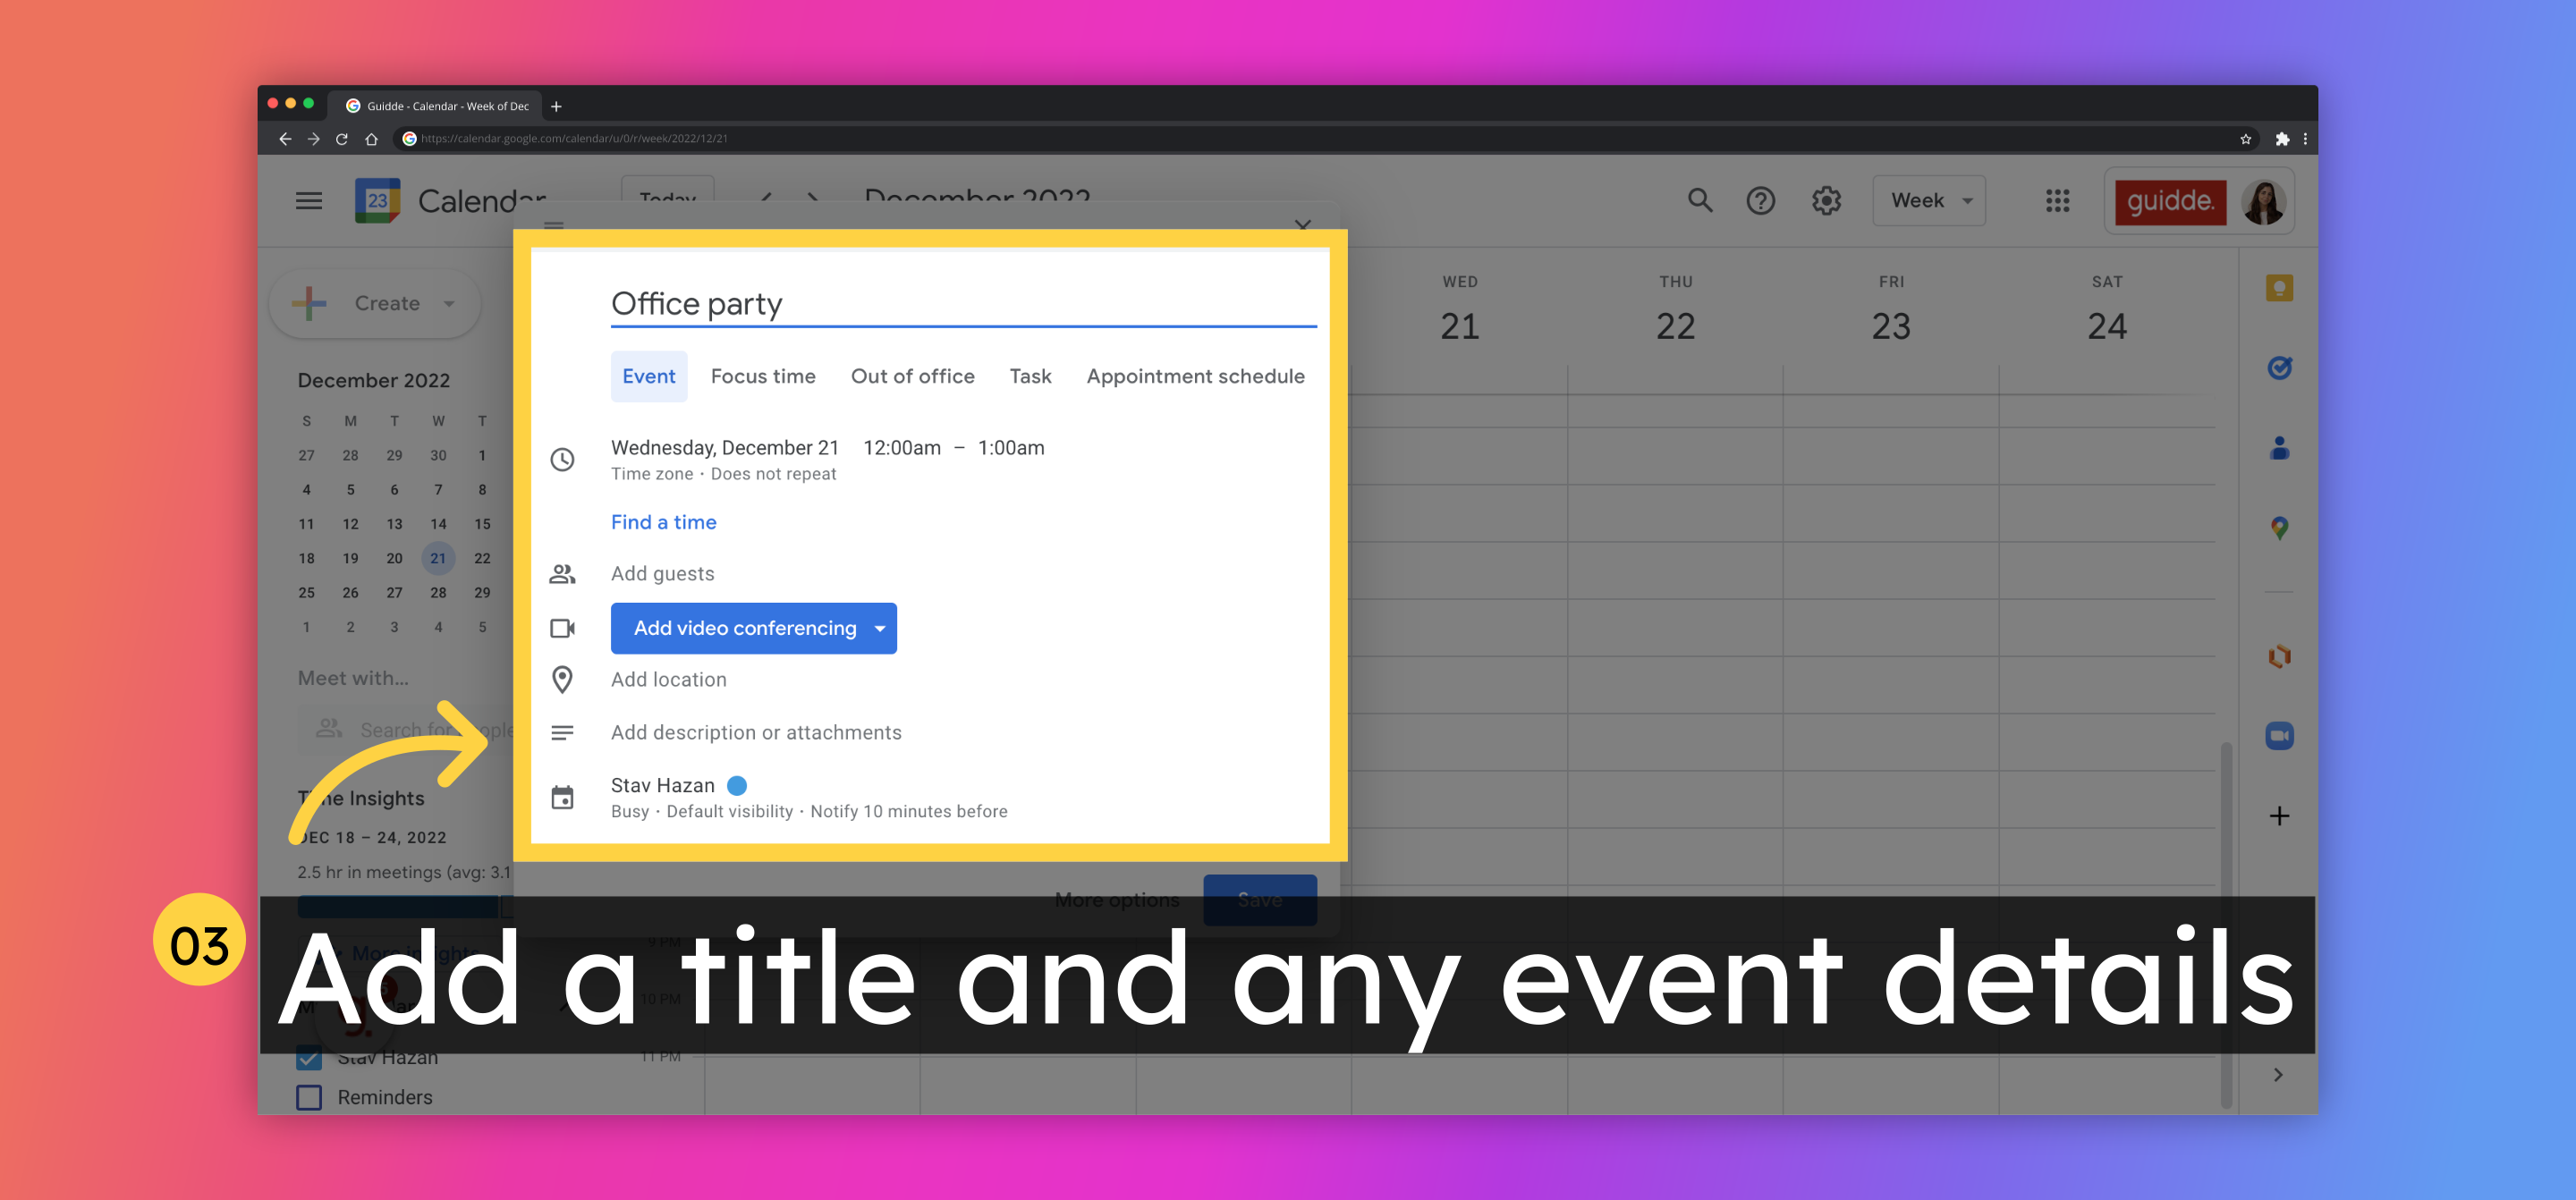 Add a title and any event details